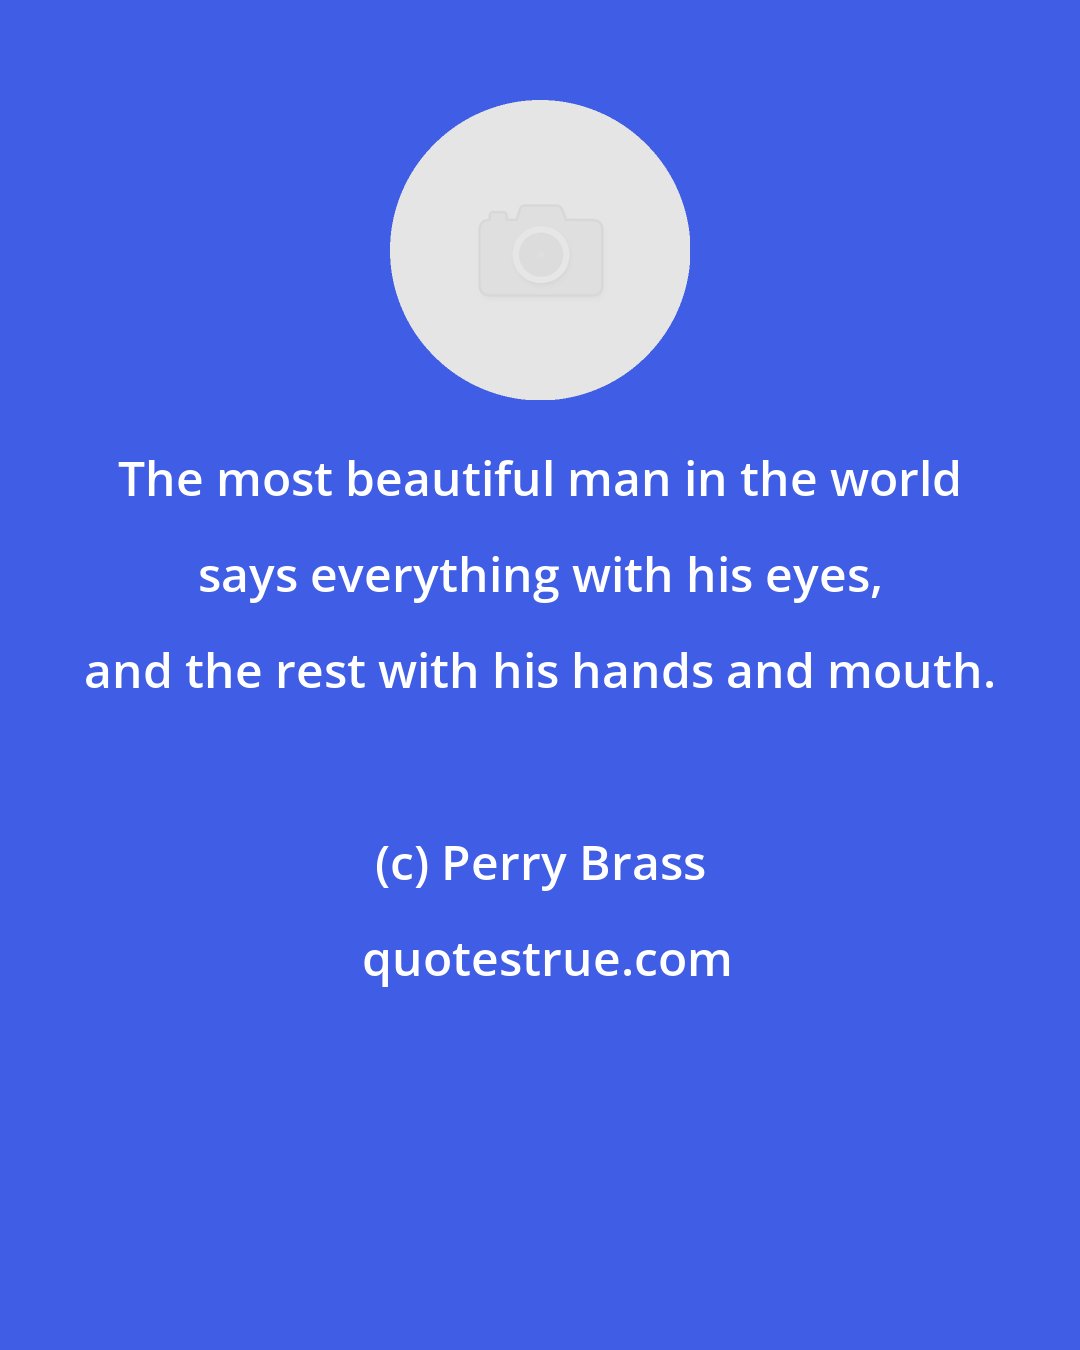 Perry Brass: The most beautiful man in the world says everything with his eyes, and the rest with his hands and mouth.